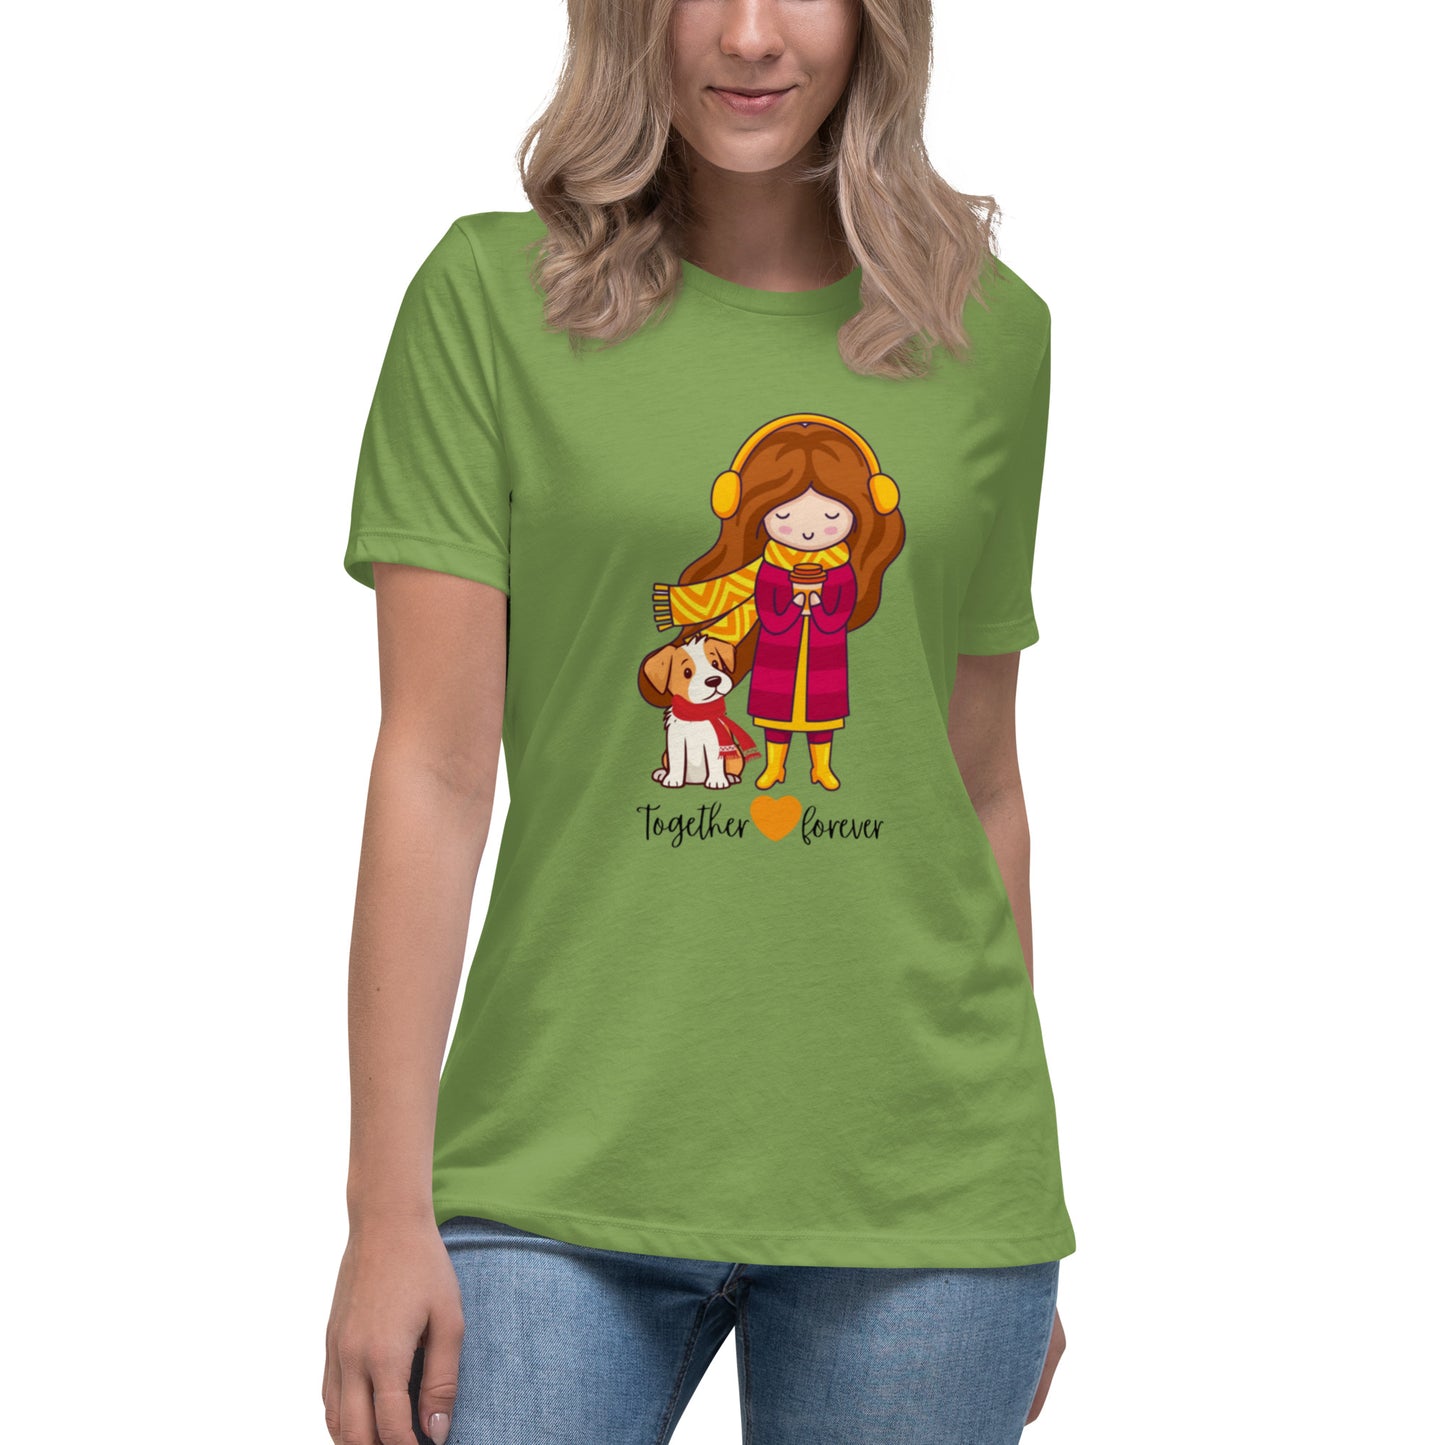 Together Forever Women's Relaxed T-Shirt